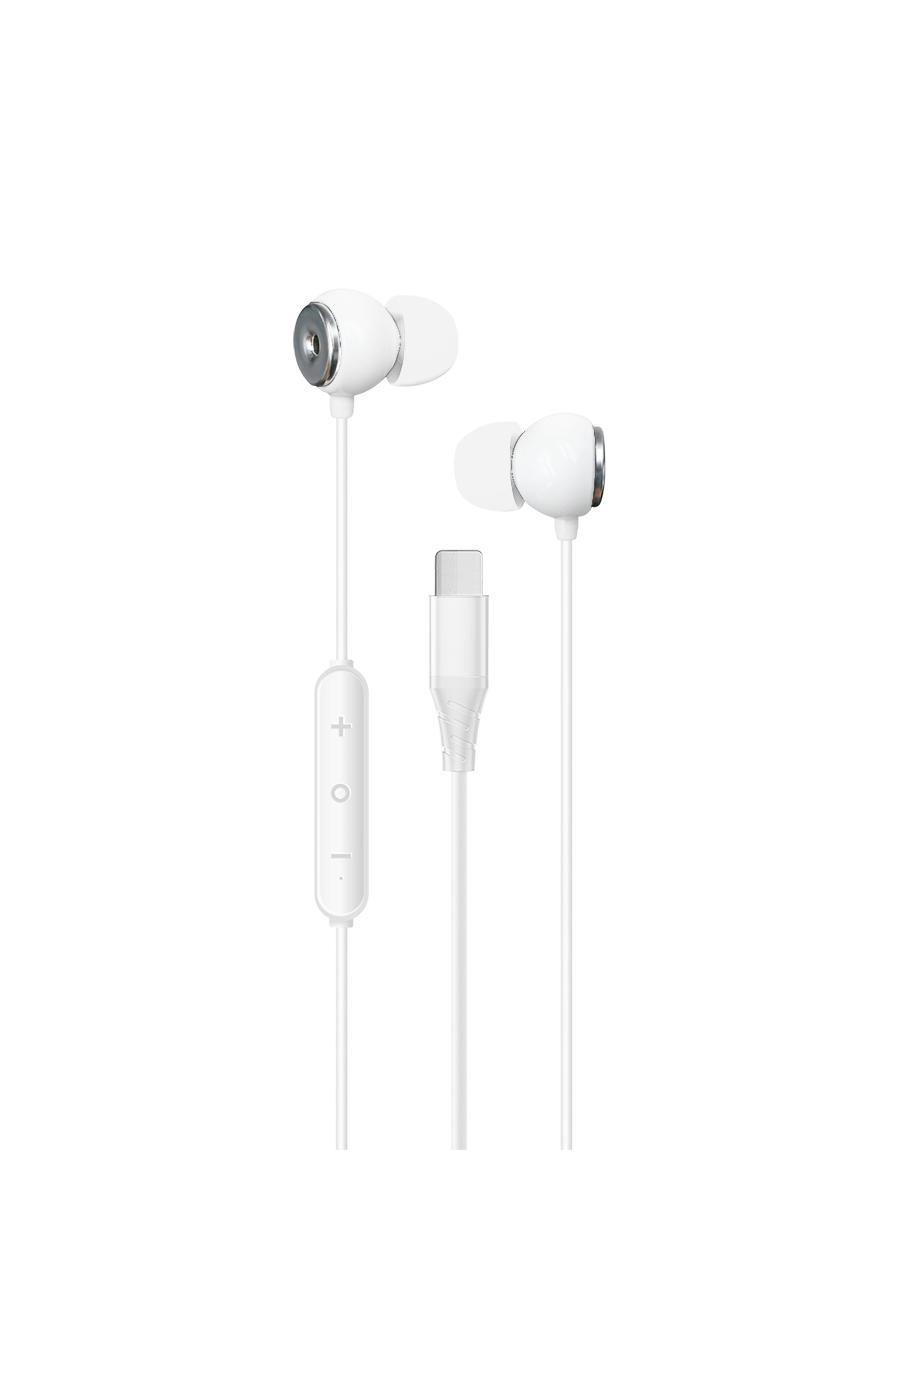 Helix Ultra USB-C Earbuds - White; image 2 of 2